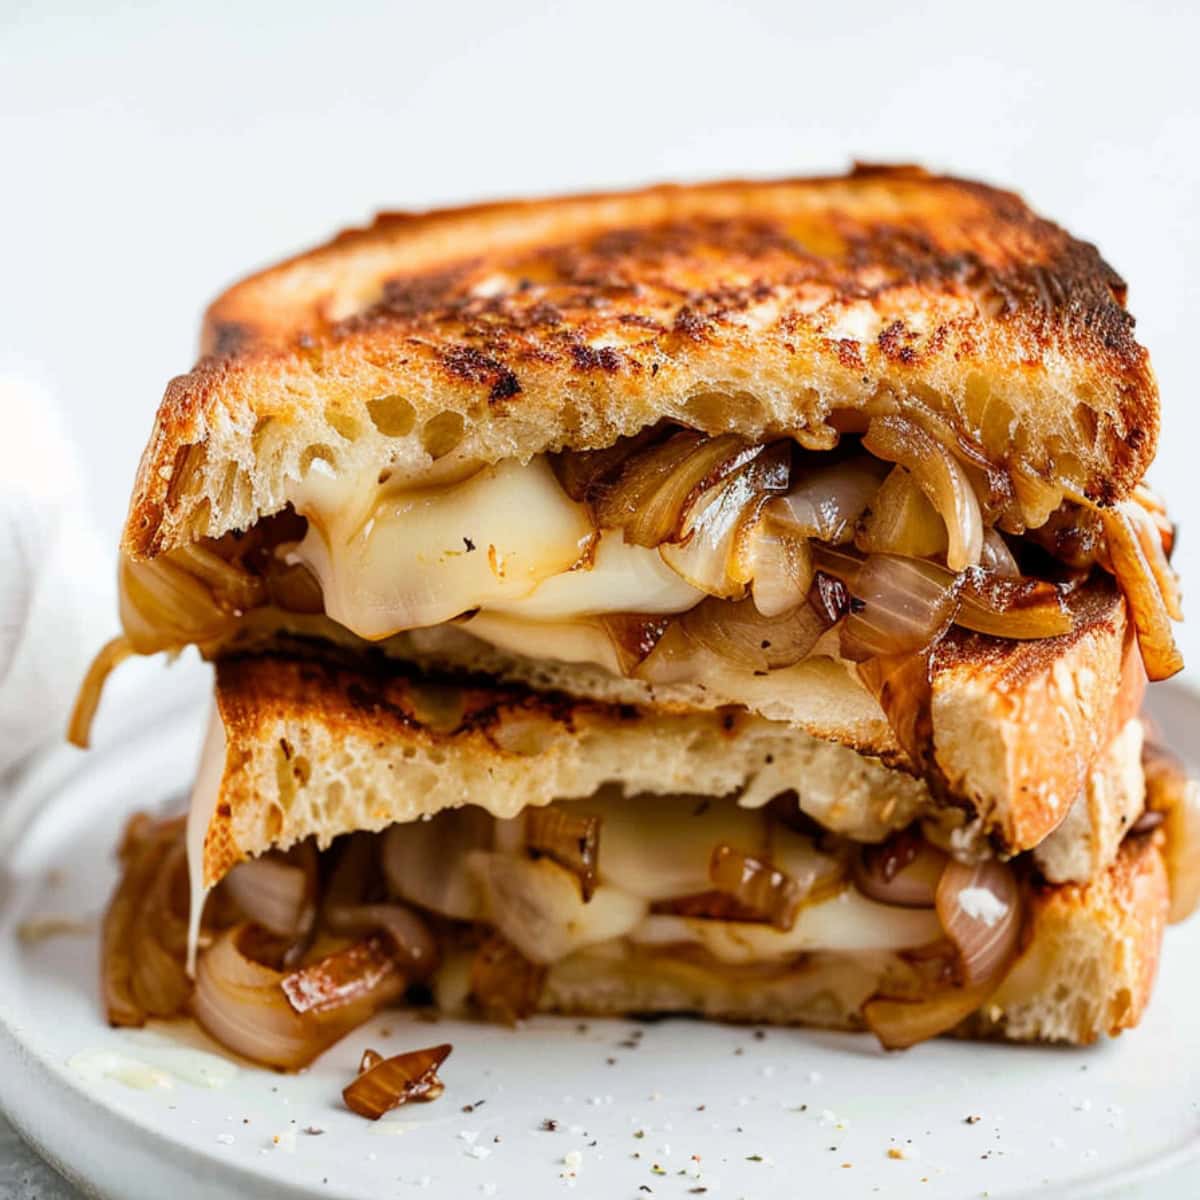 Sliced in half French onion grilled sandwich with melted cheese.